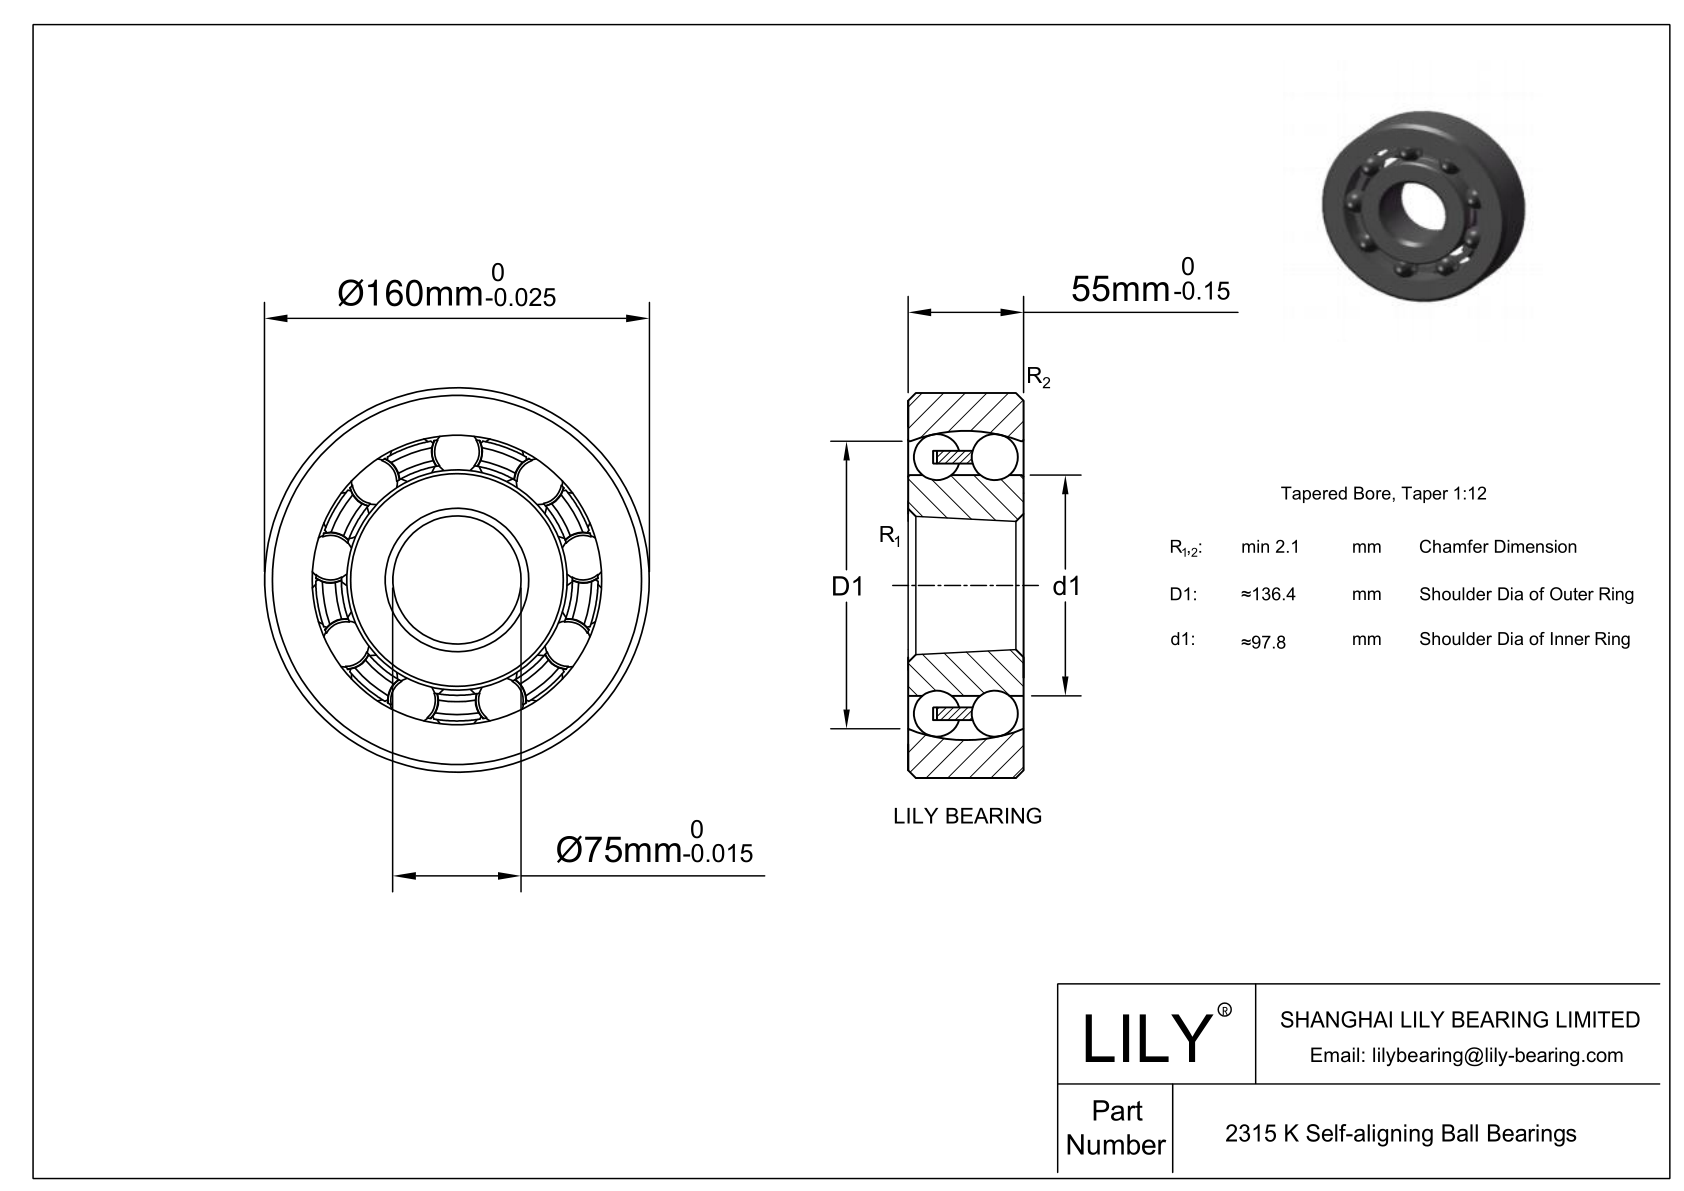 S2315 K Stainless Steel Self Aligning Ball Bearings cad drawing